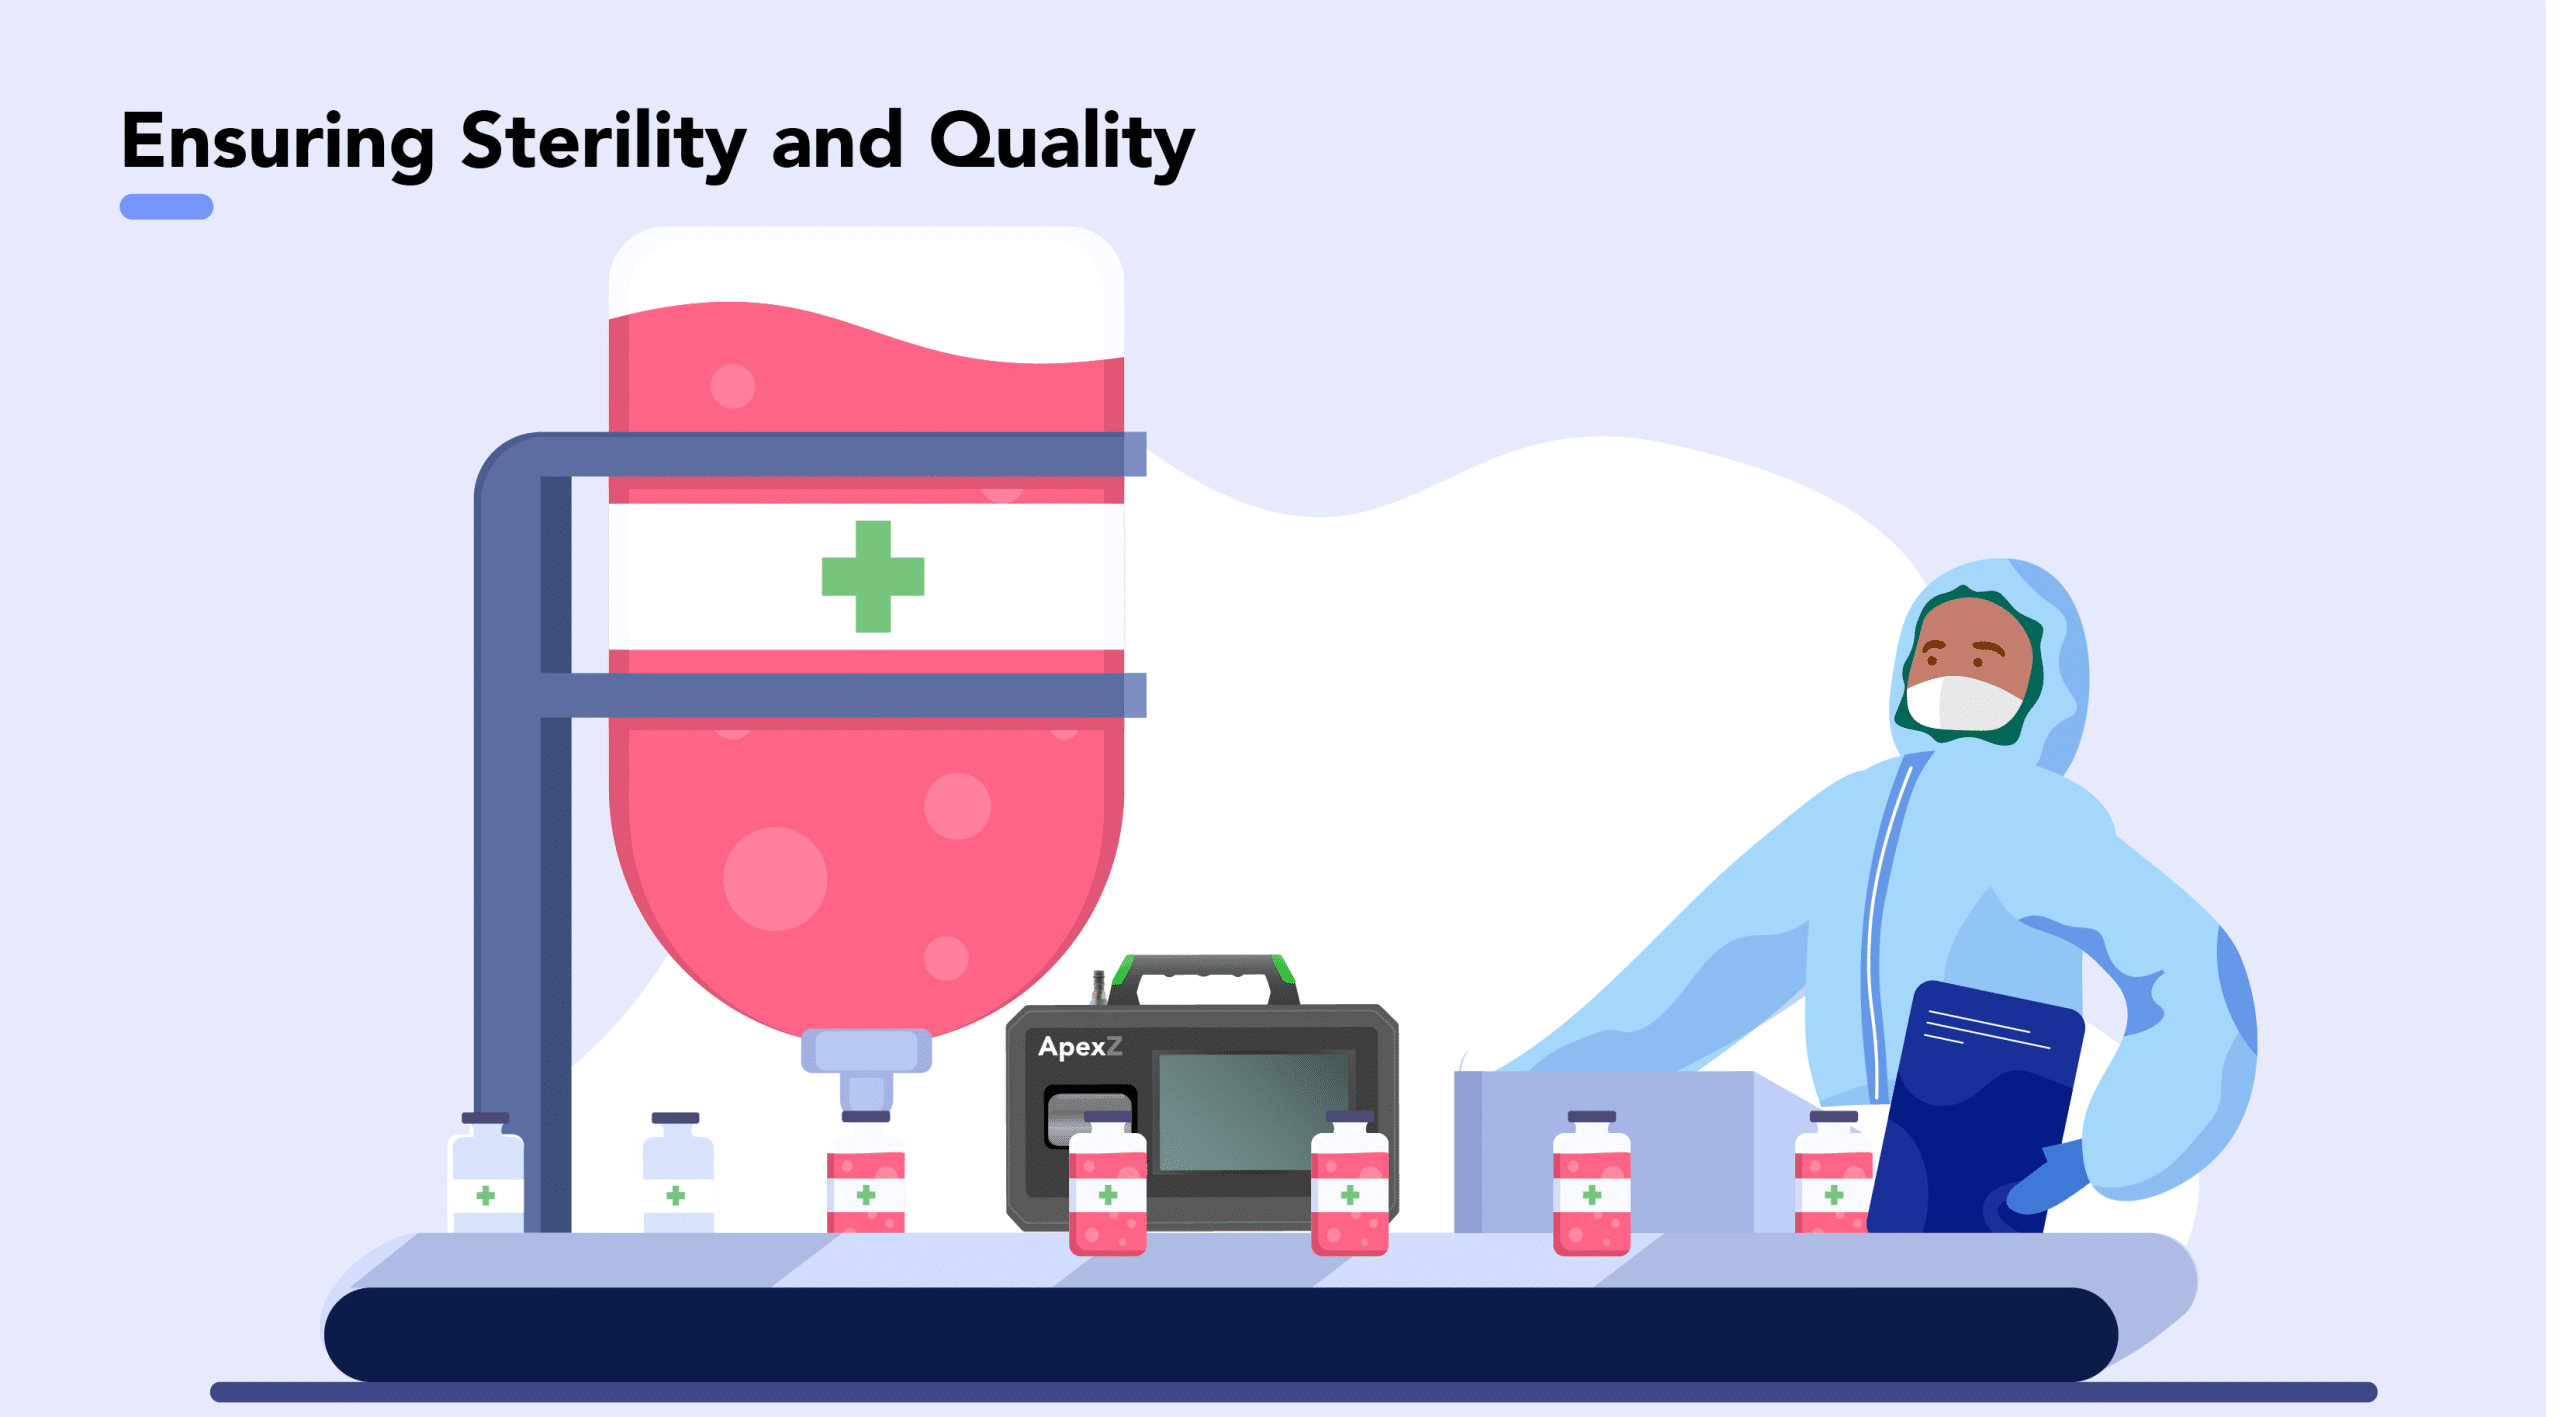 Ensuring Sterility and Quality